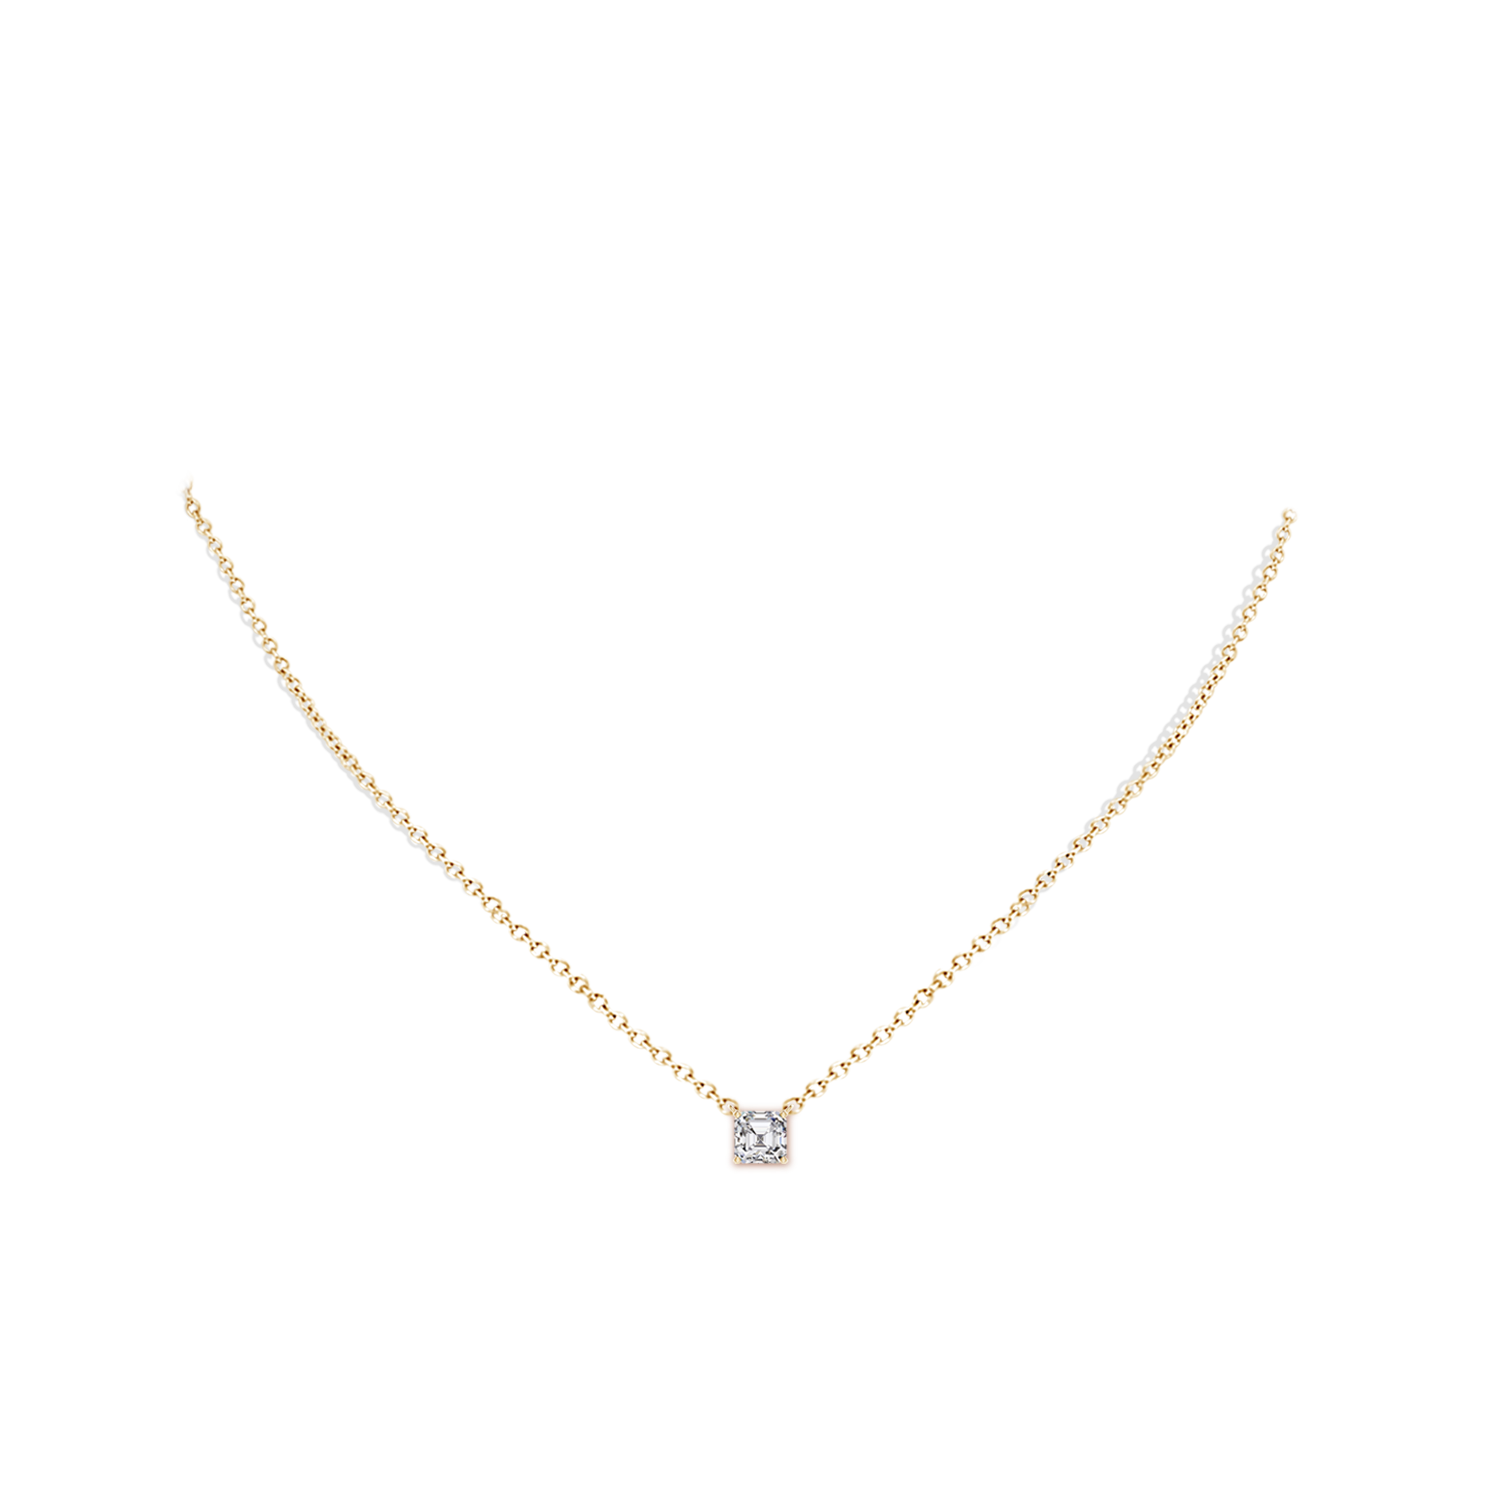 H, SI2 / 3 CT / 18 KT Yellow Gold